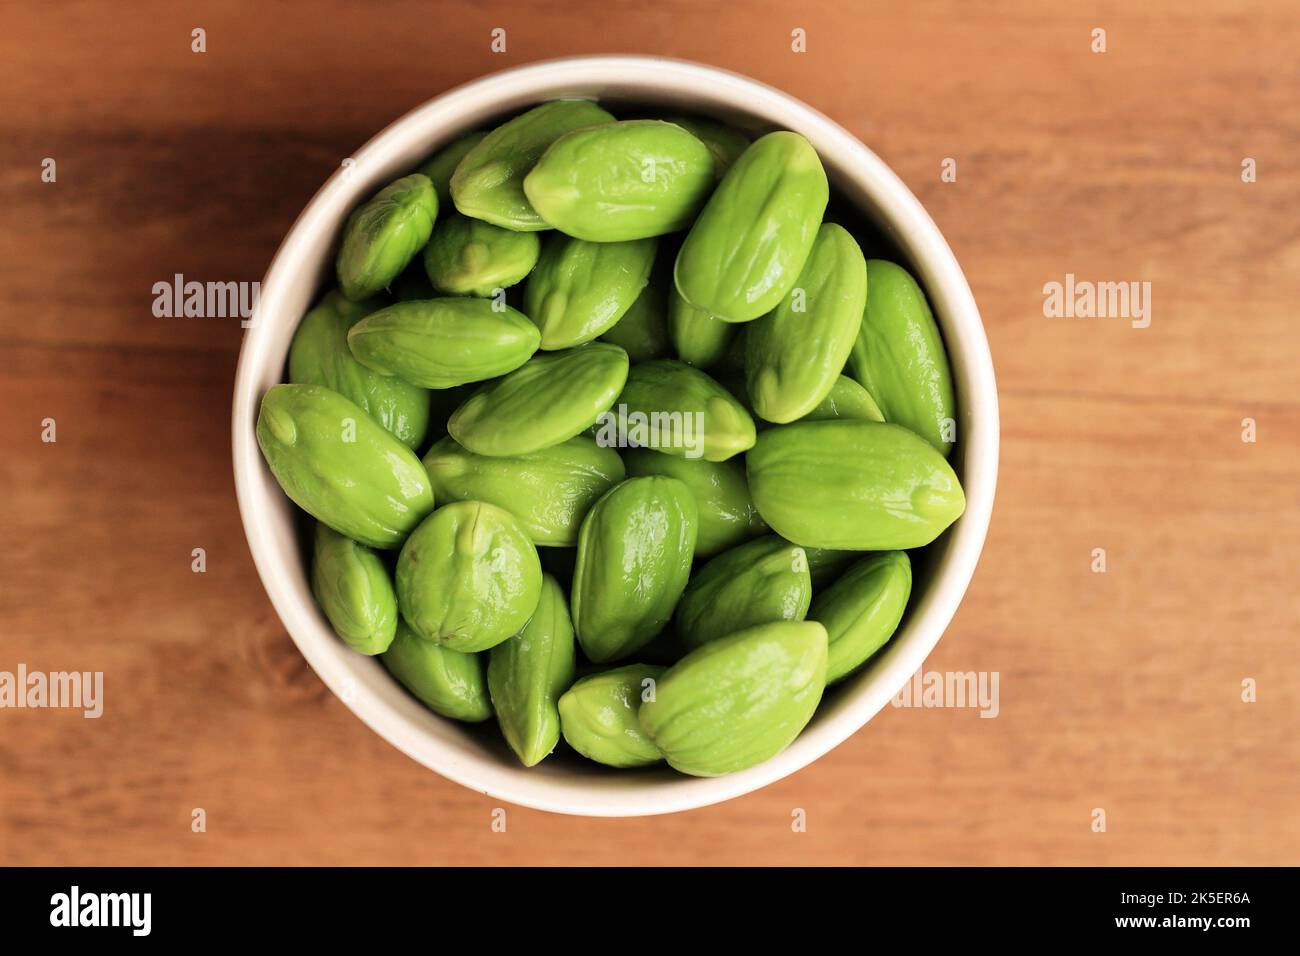 Raw Peeled  Pete Petai  or Parkia speciosa in a Bowl. Petai Popular Stinky Bitter Bean from Indonesia and Thailand Stock Photo